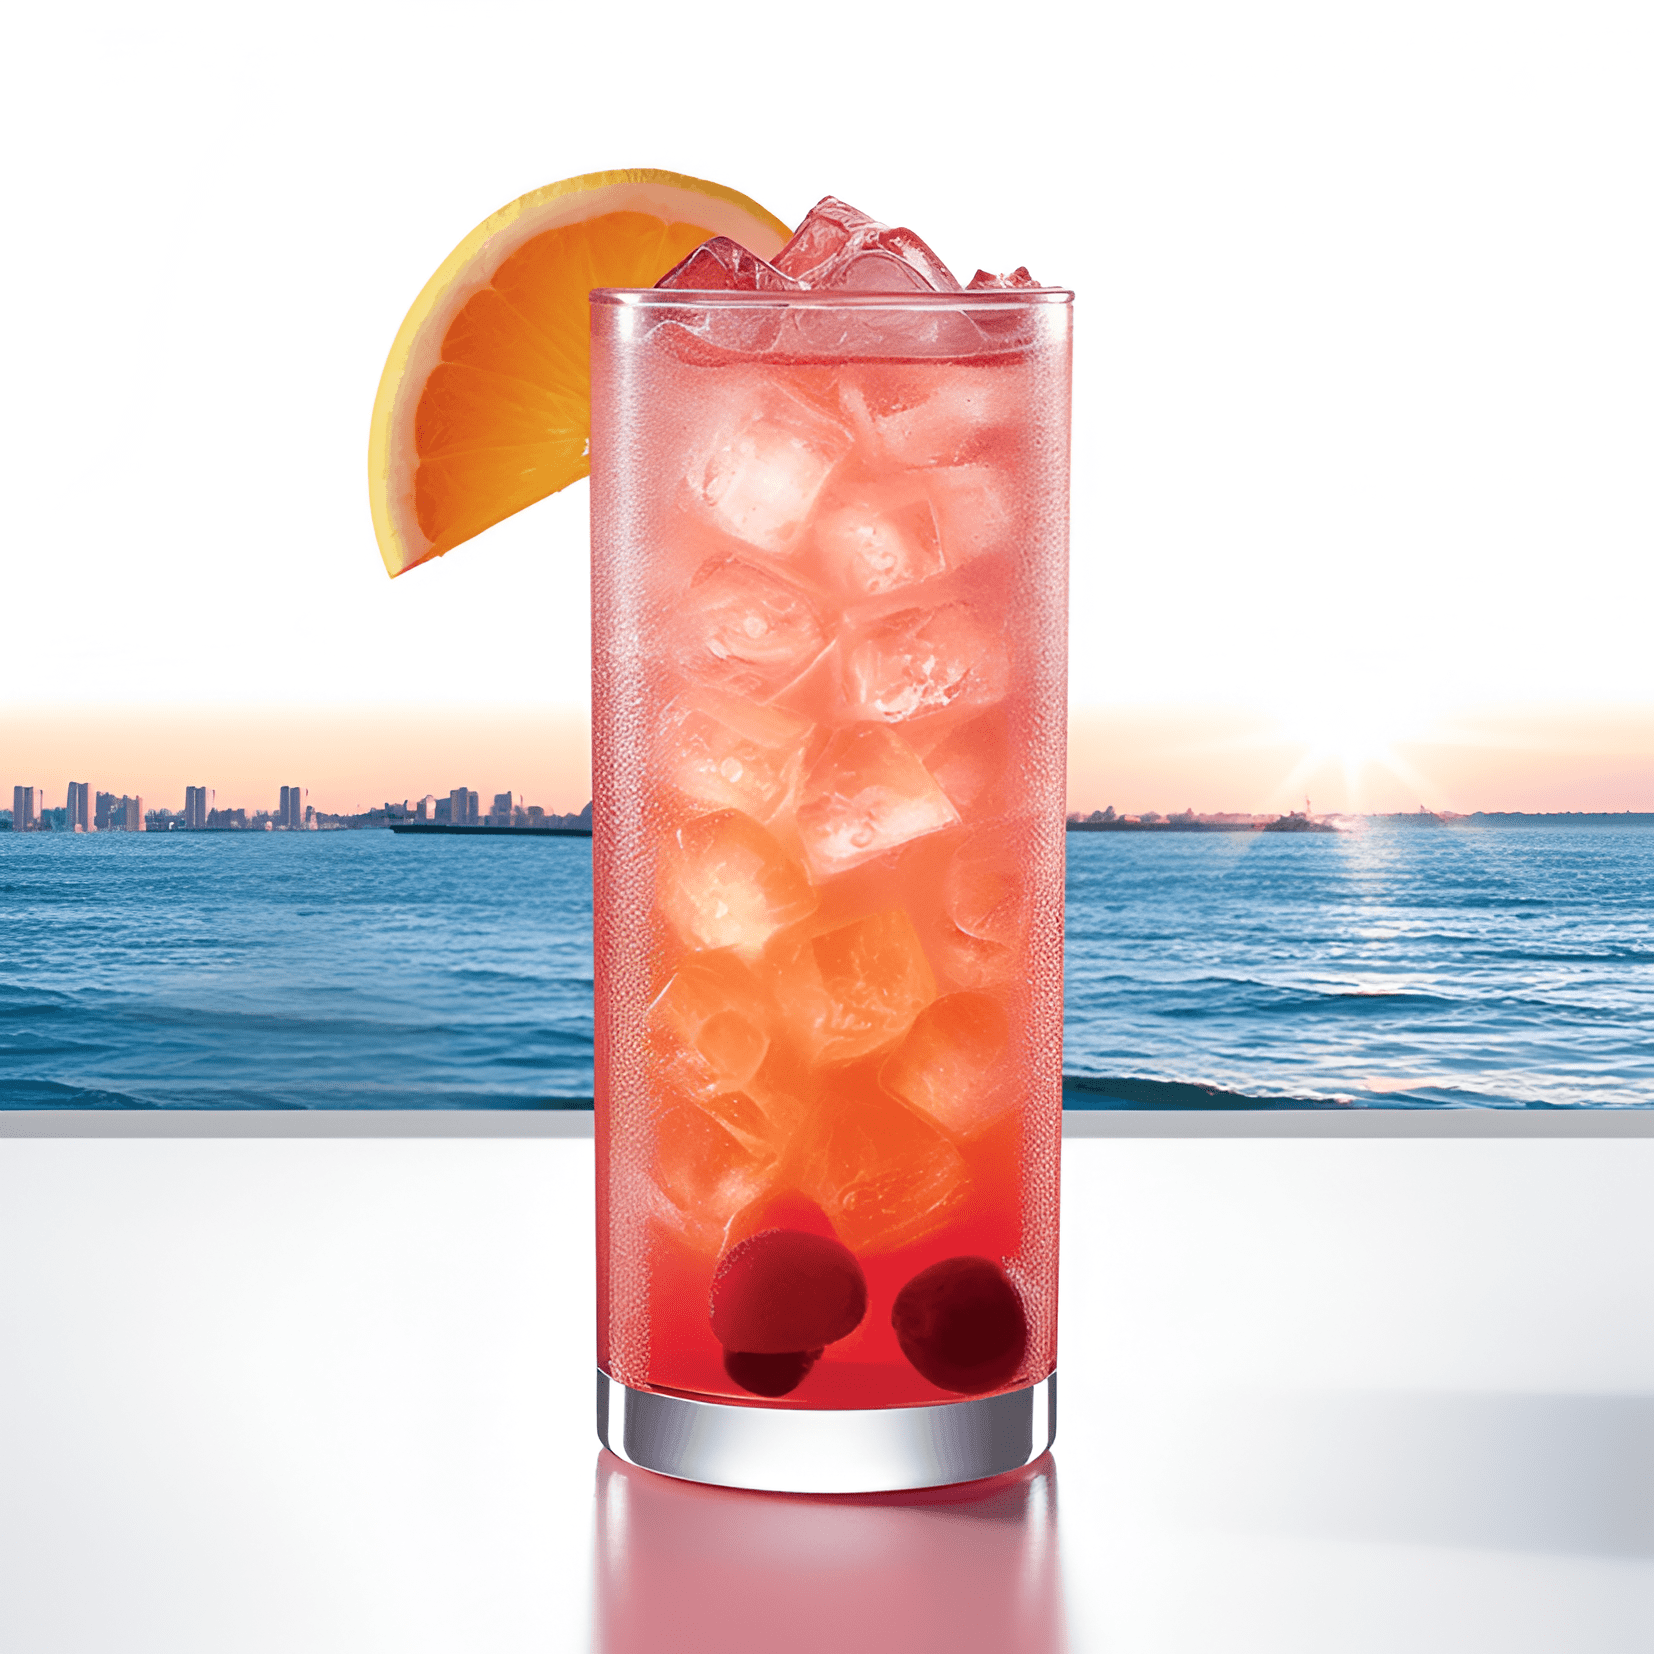 Sea Breeze Cocktail Recipe - The Sea Breeze cocktail is a refreshing, fruity, and slightly tart drink. It has a balanced combination of sweet and sour flavors, with a light and crisp finish.